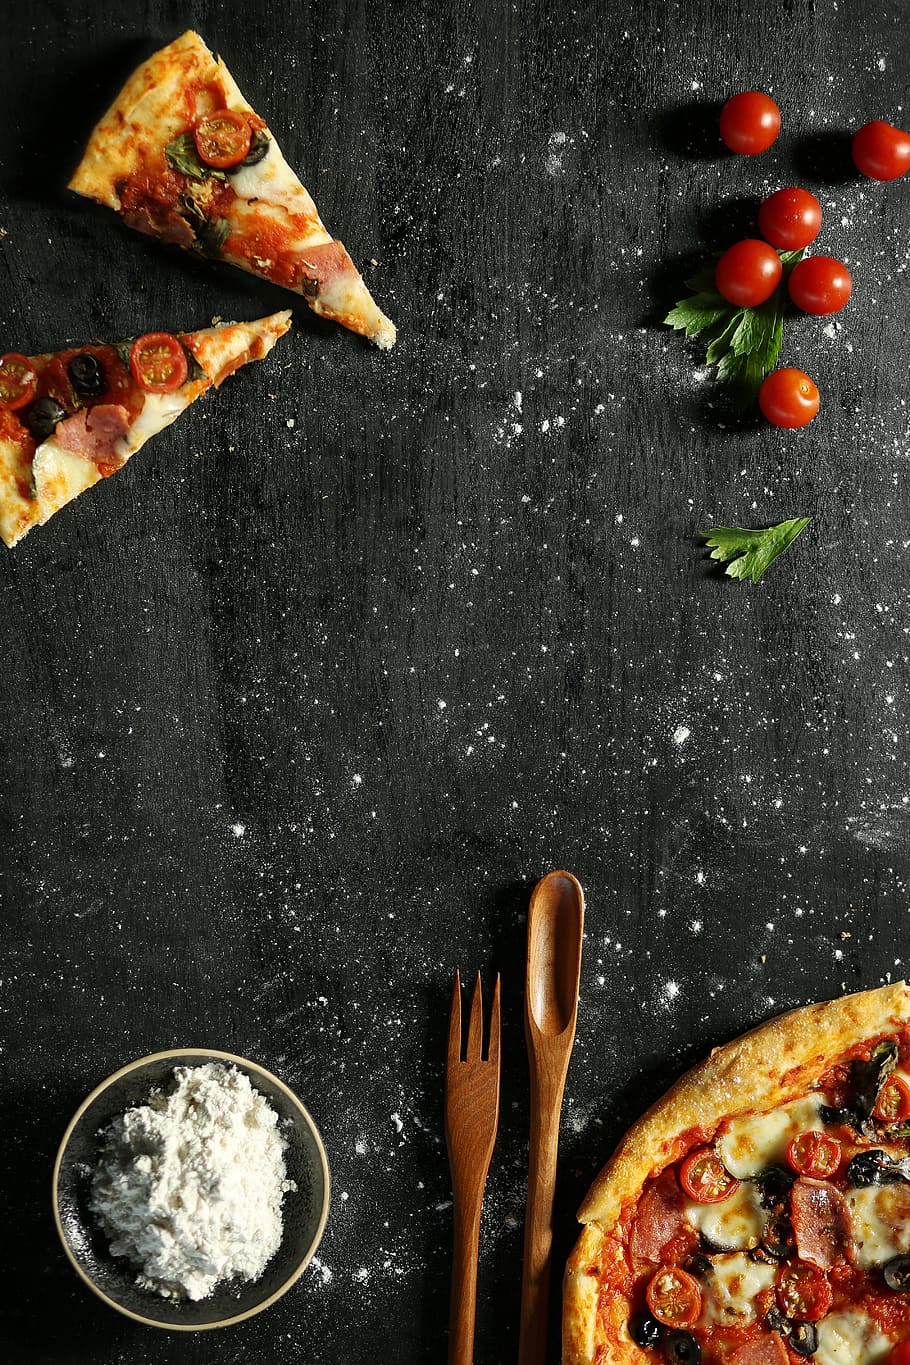 HD wallpaper: two slice of pizza near tomatoes and spoon, pizza hut, cooking